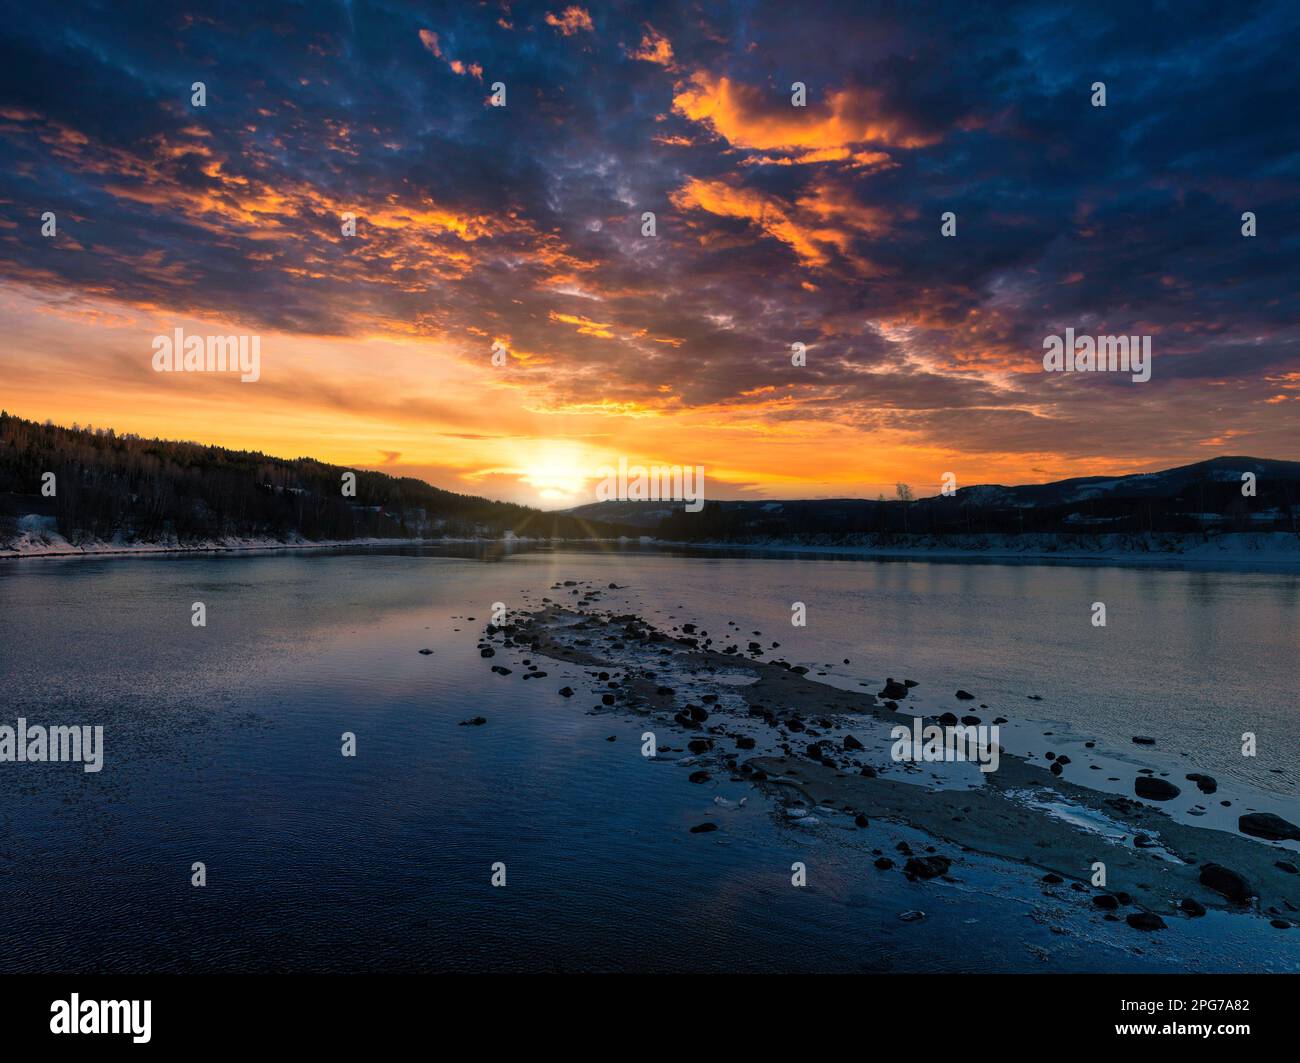 A landscape of the River Glomma during the sunrise in Norway Stock Photo